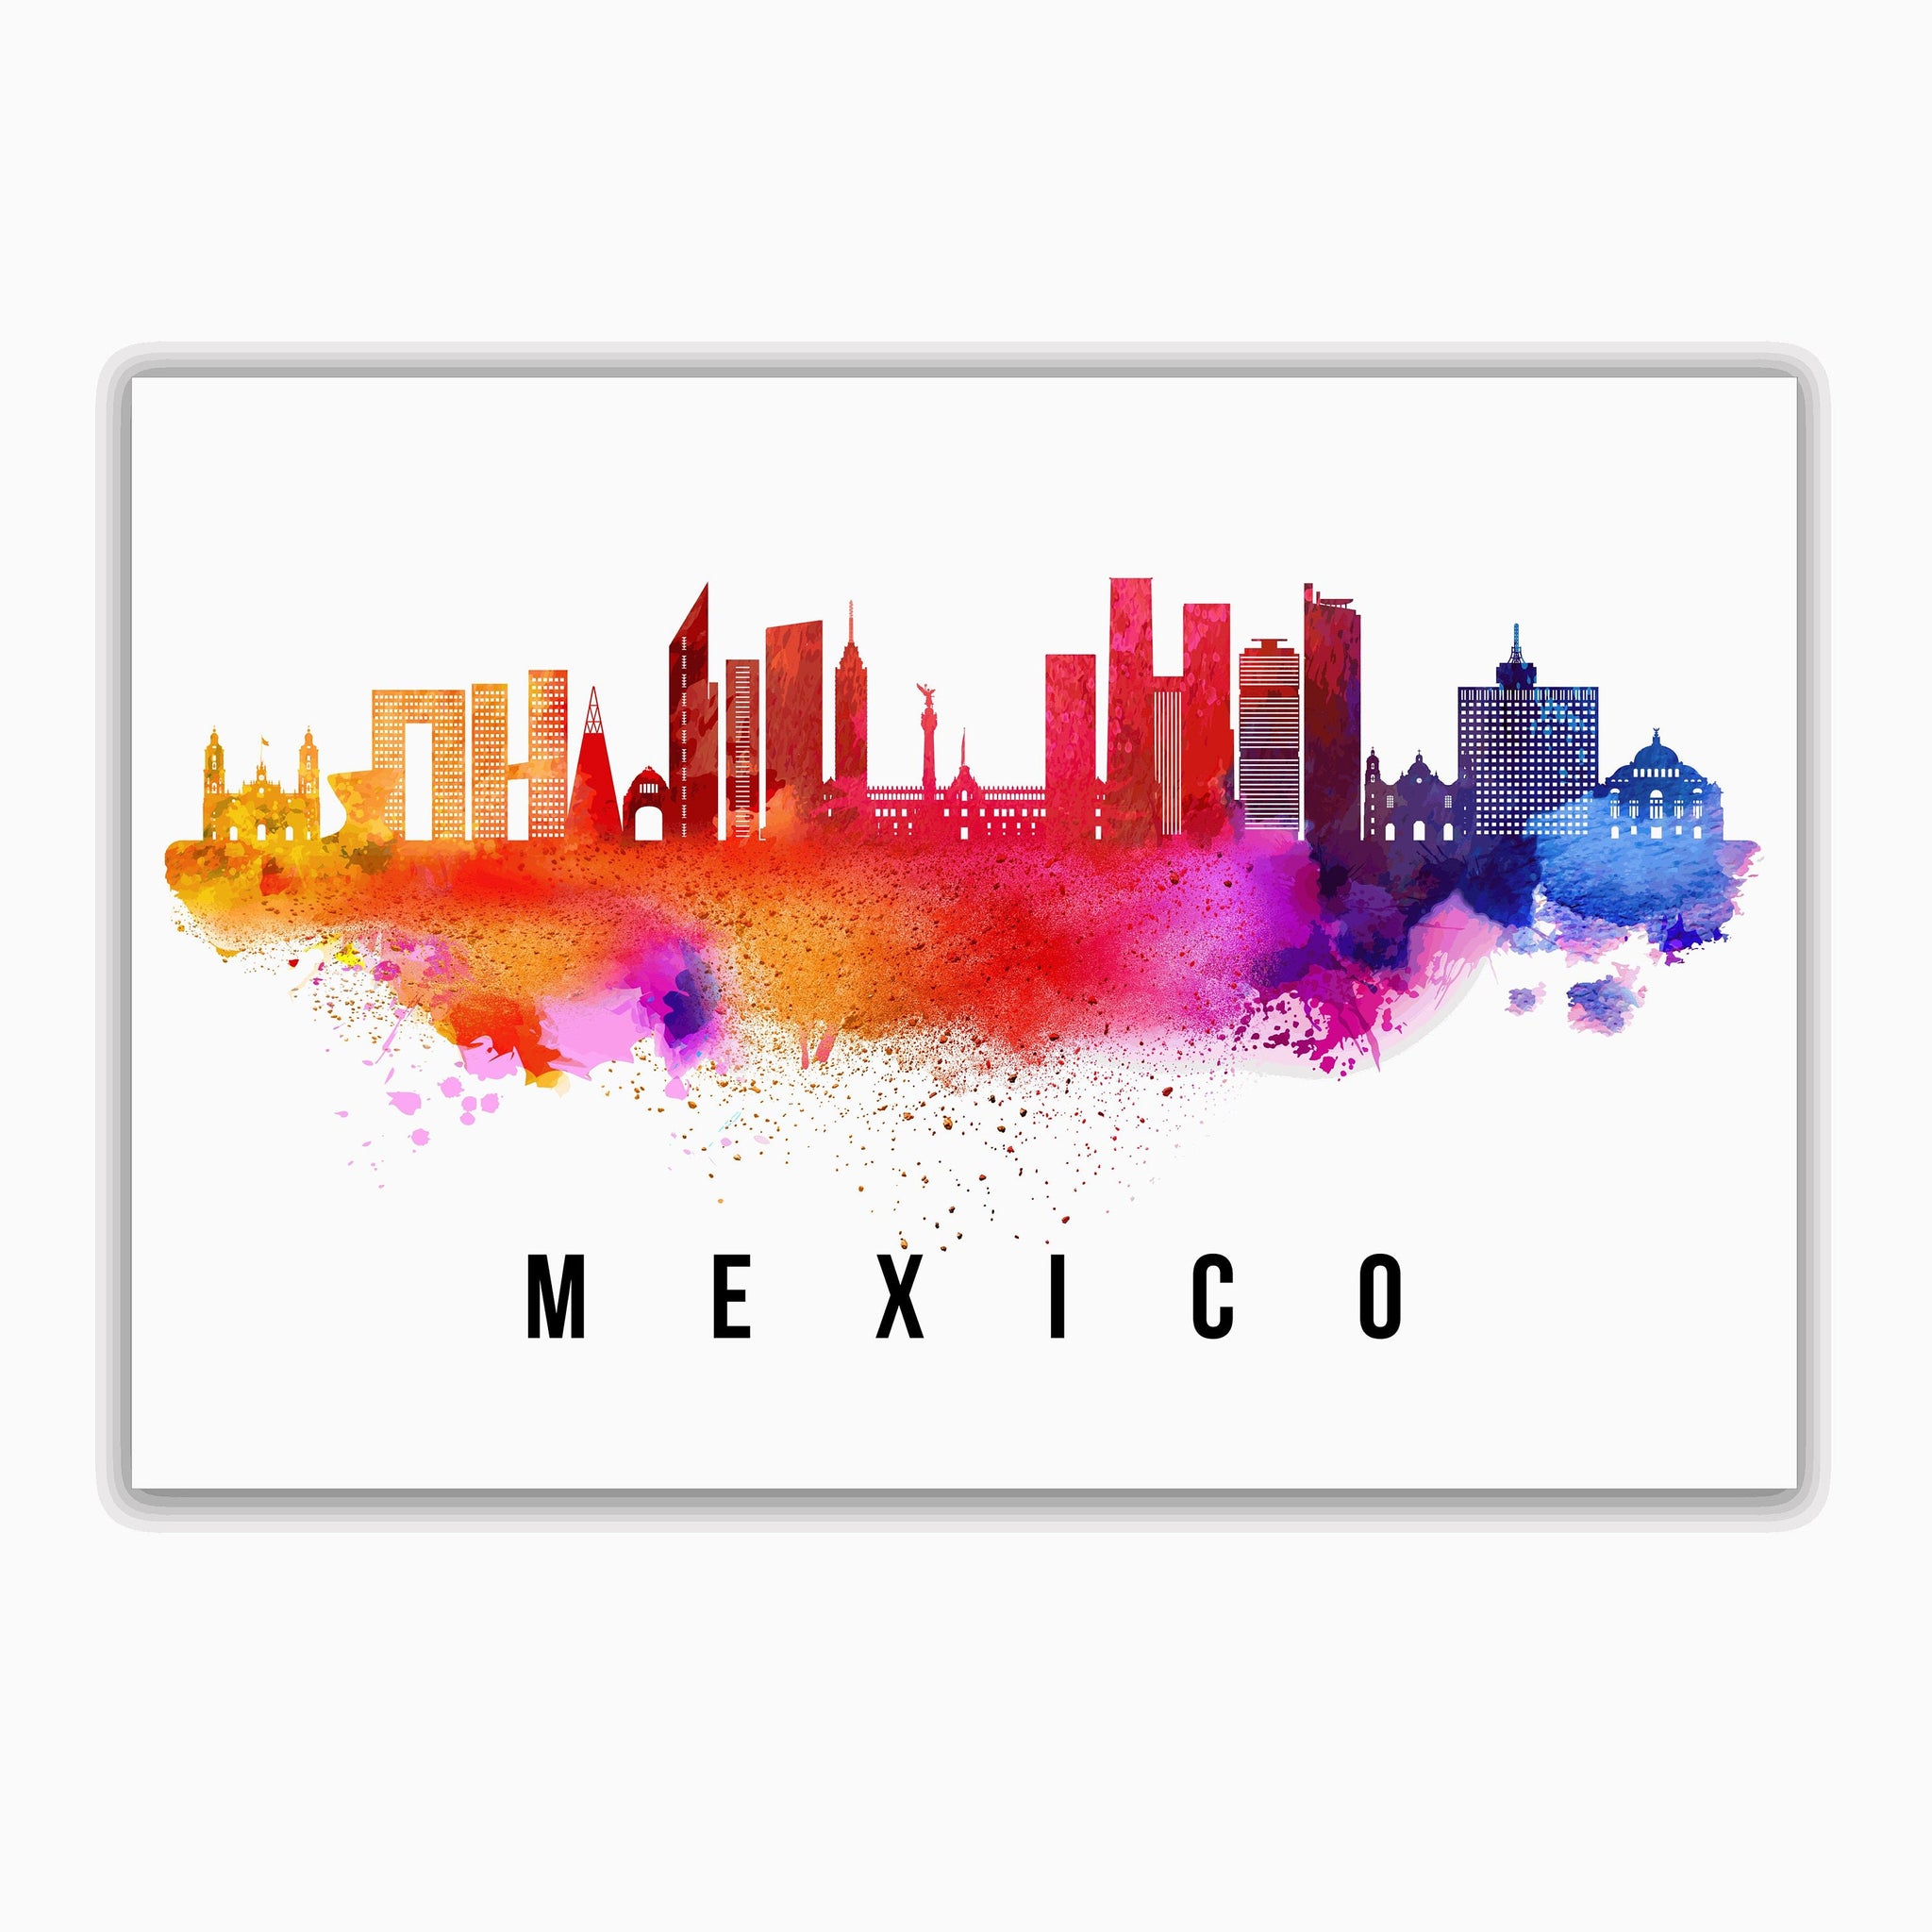 MEXICO CITY - MEXICO Poster, Skyline Poster Cityscape and Landmark Mexico City Illustration Home Wall Art, Office Decor